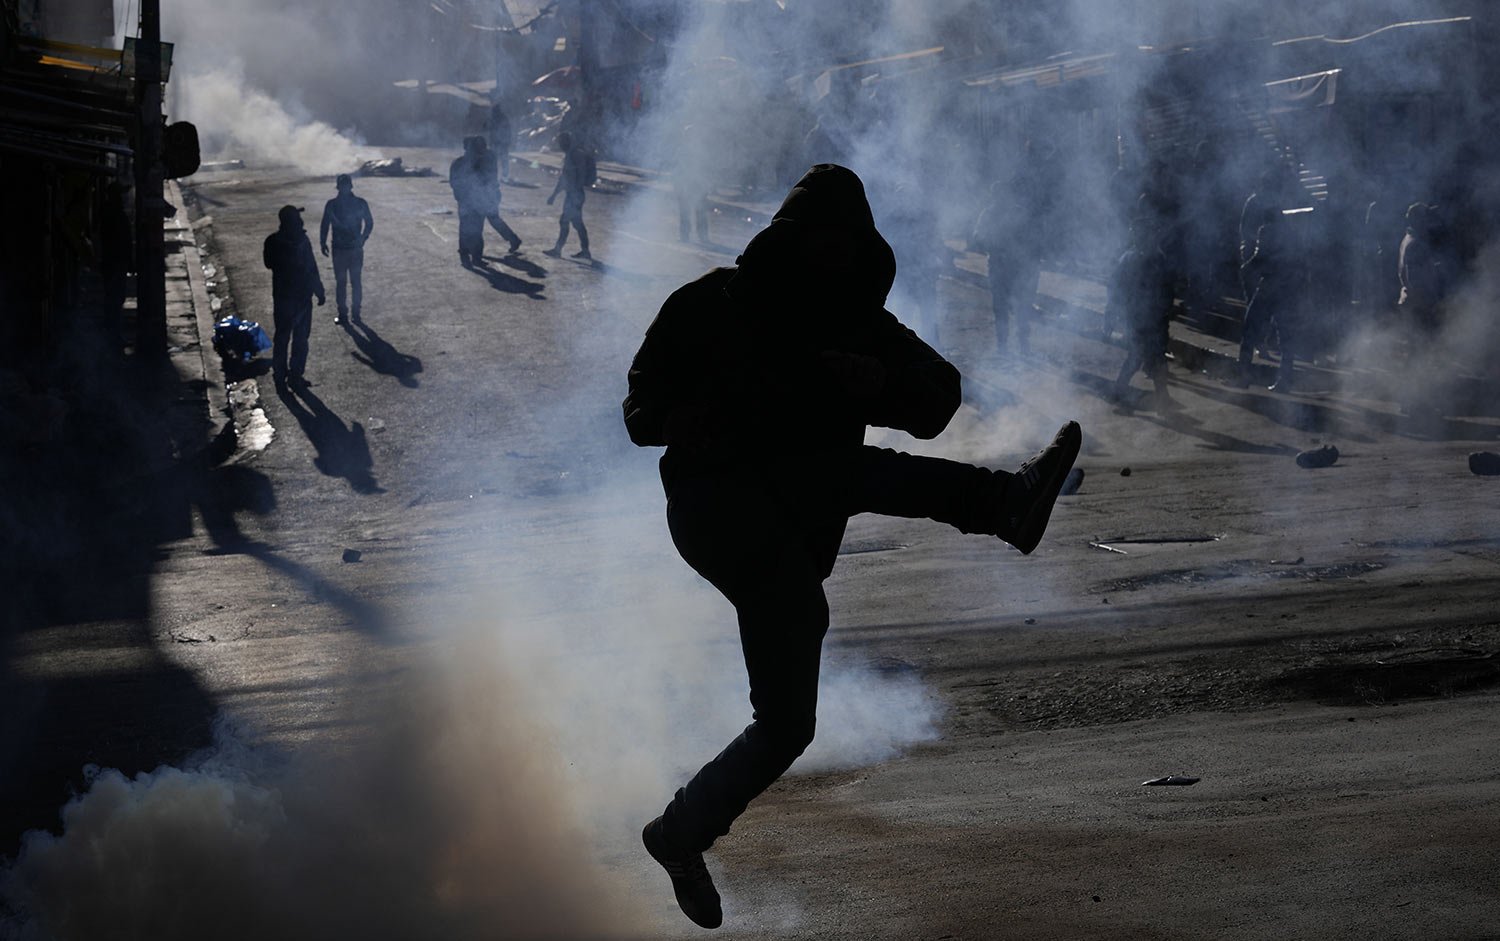  A coca farmer kicks a tear gas canister back at police on the third day of clashes near a coca market in La Paz, Bolivia, Wednesday, Aug. 3, 2022. Anti-government coca farmers are protesting against a new, parallel coca leaf market. (AP Photo/Juan K